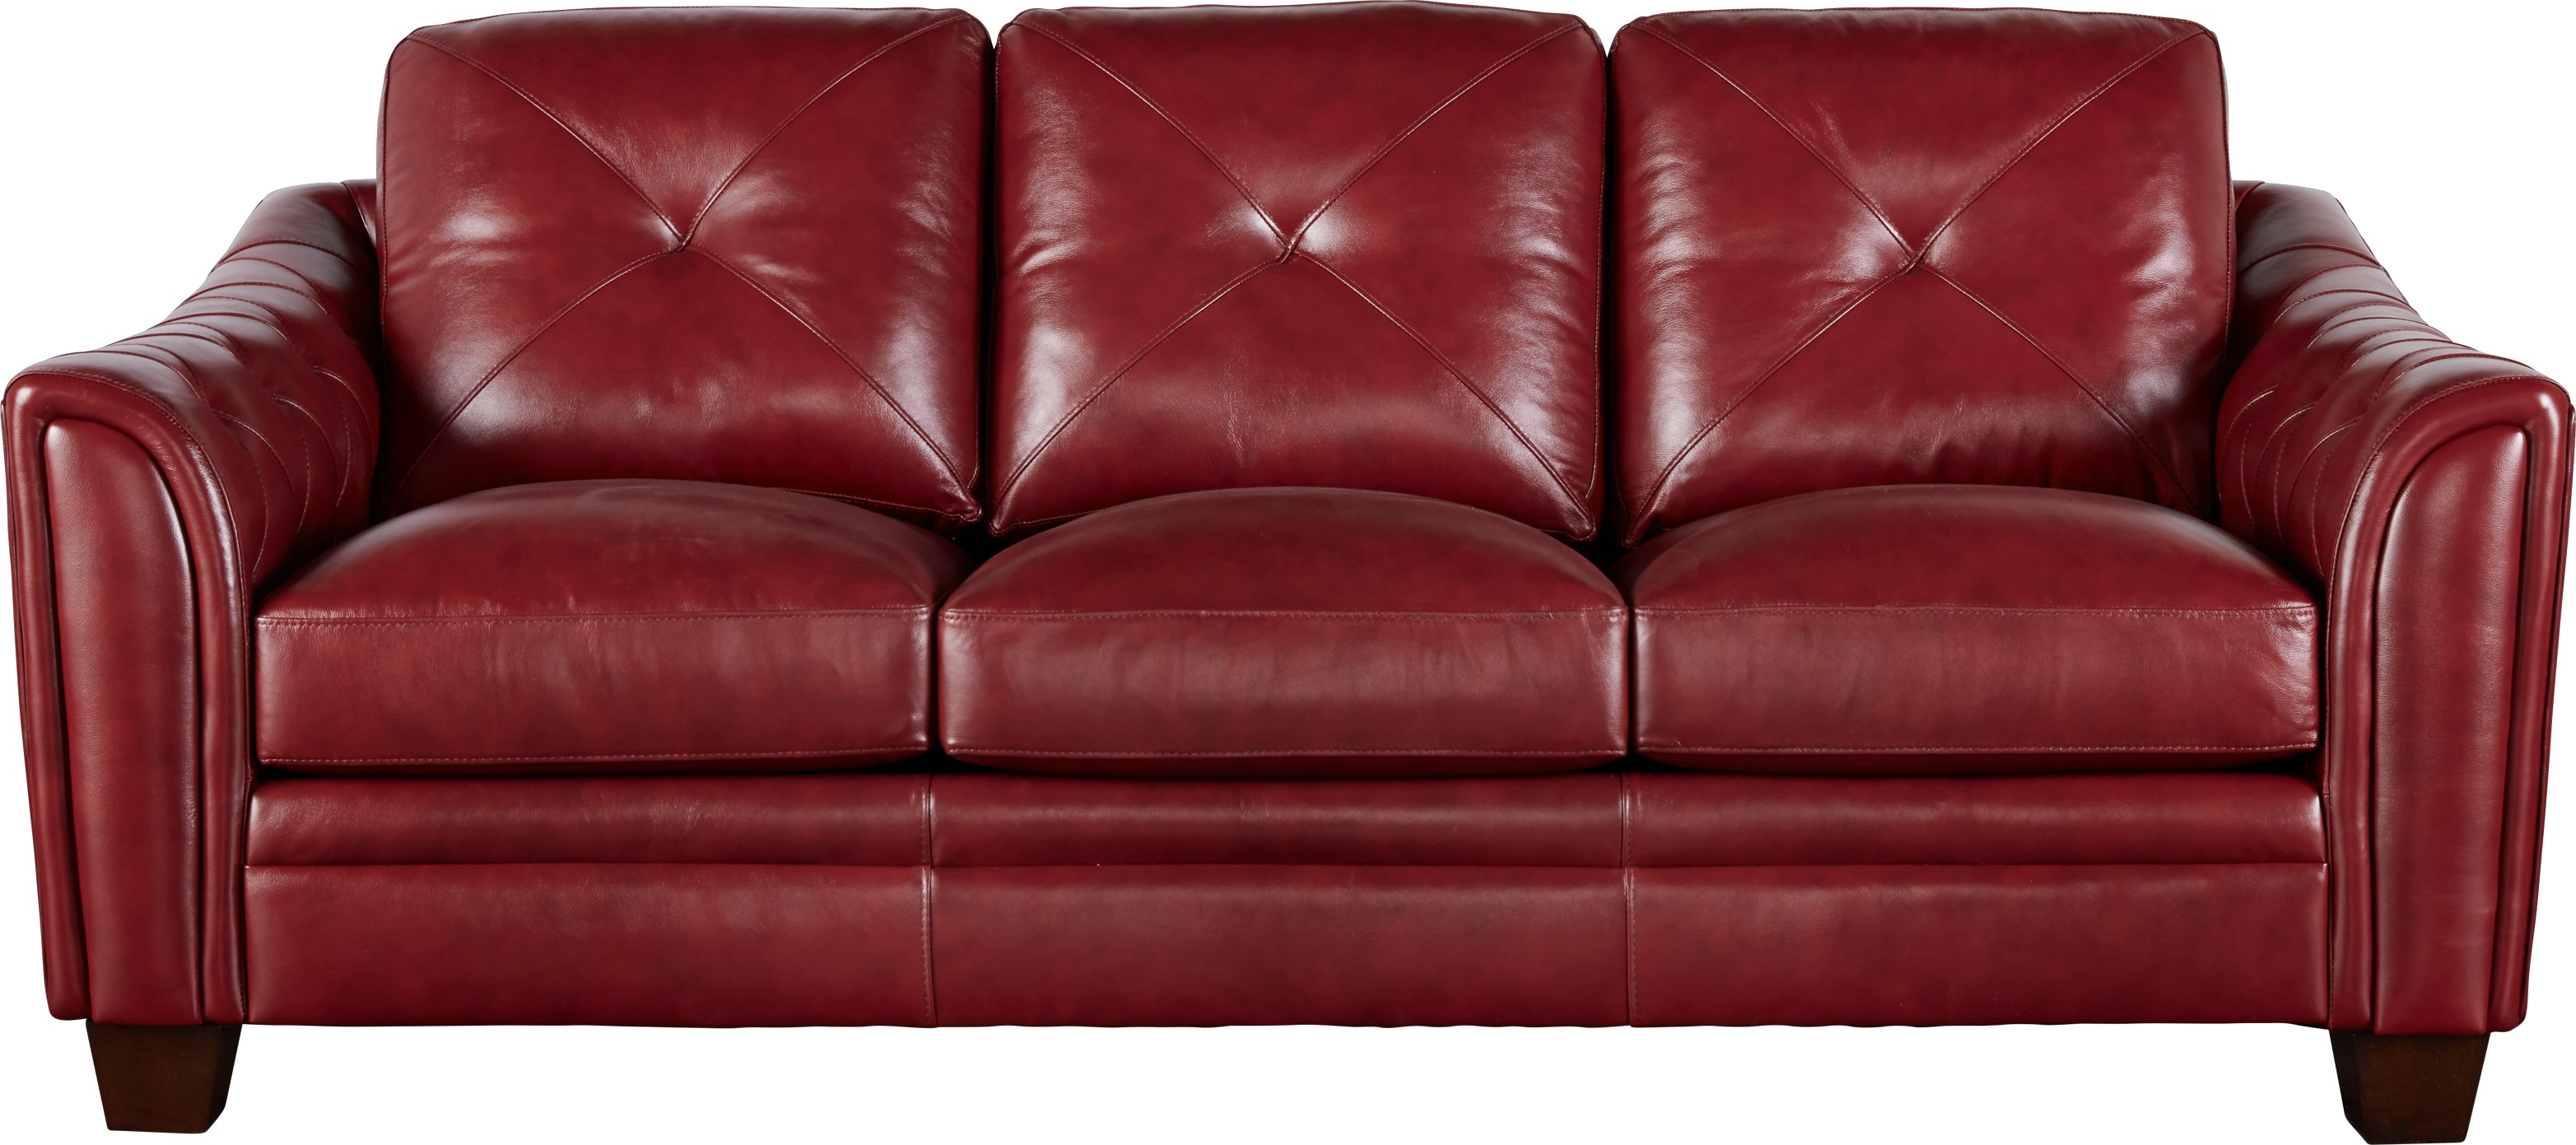 covers for old red leather sofa